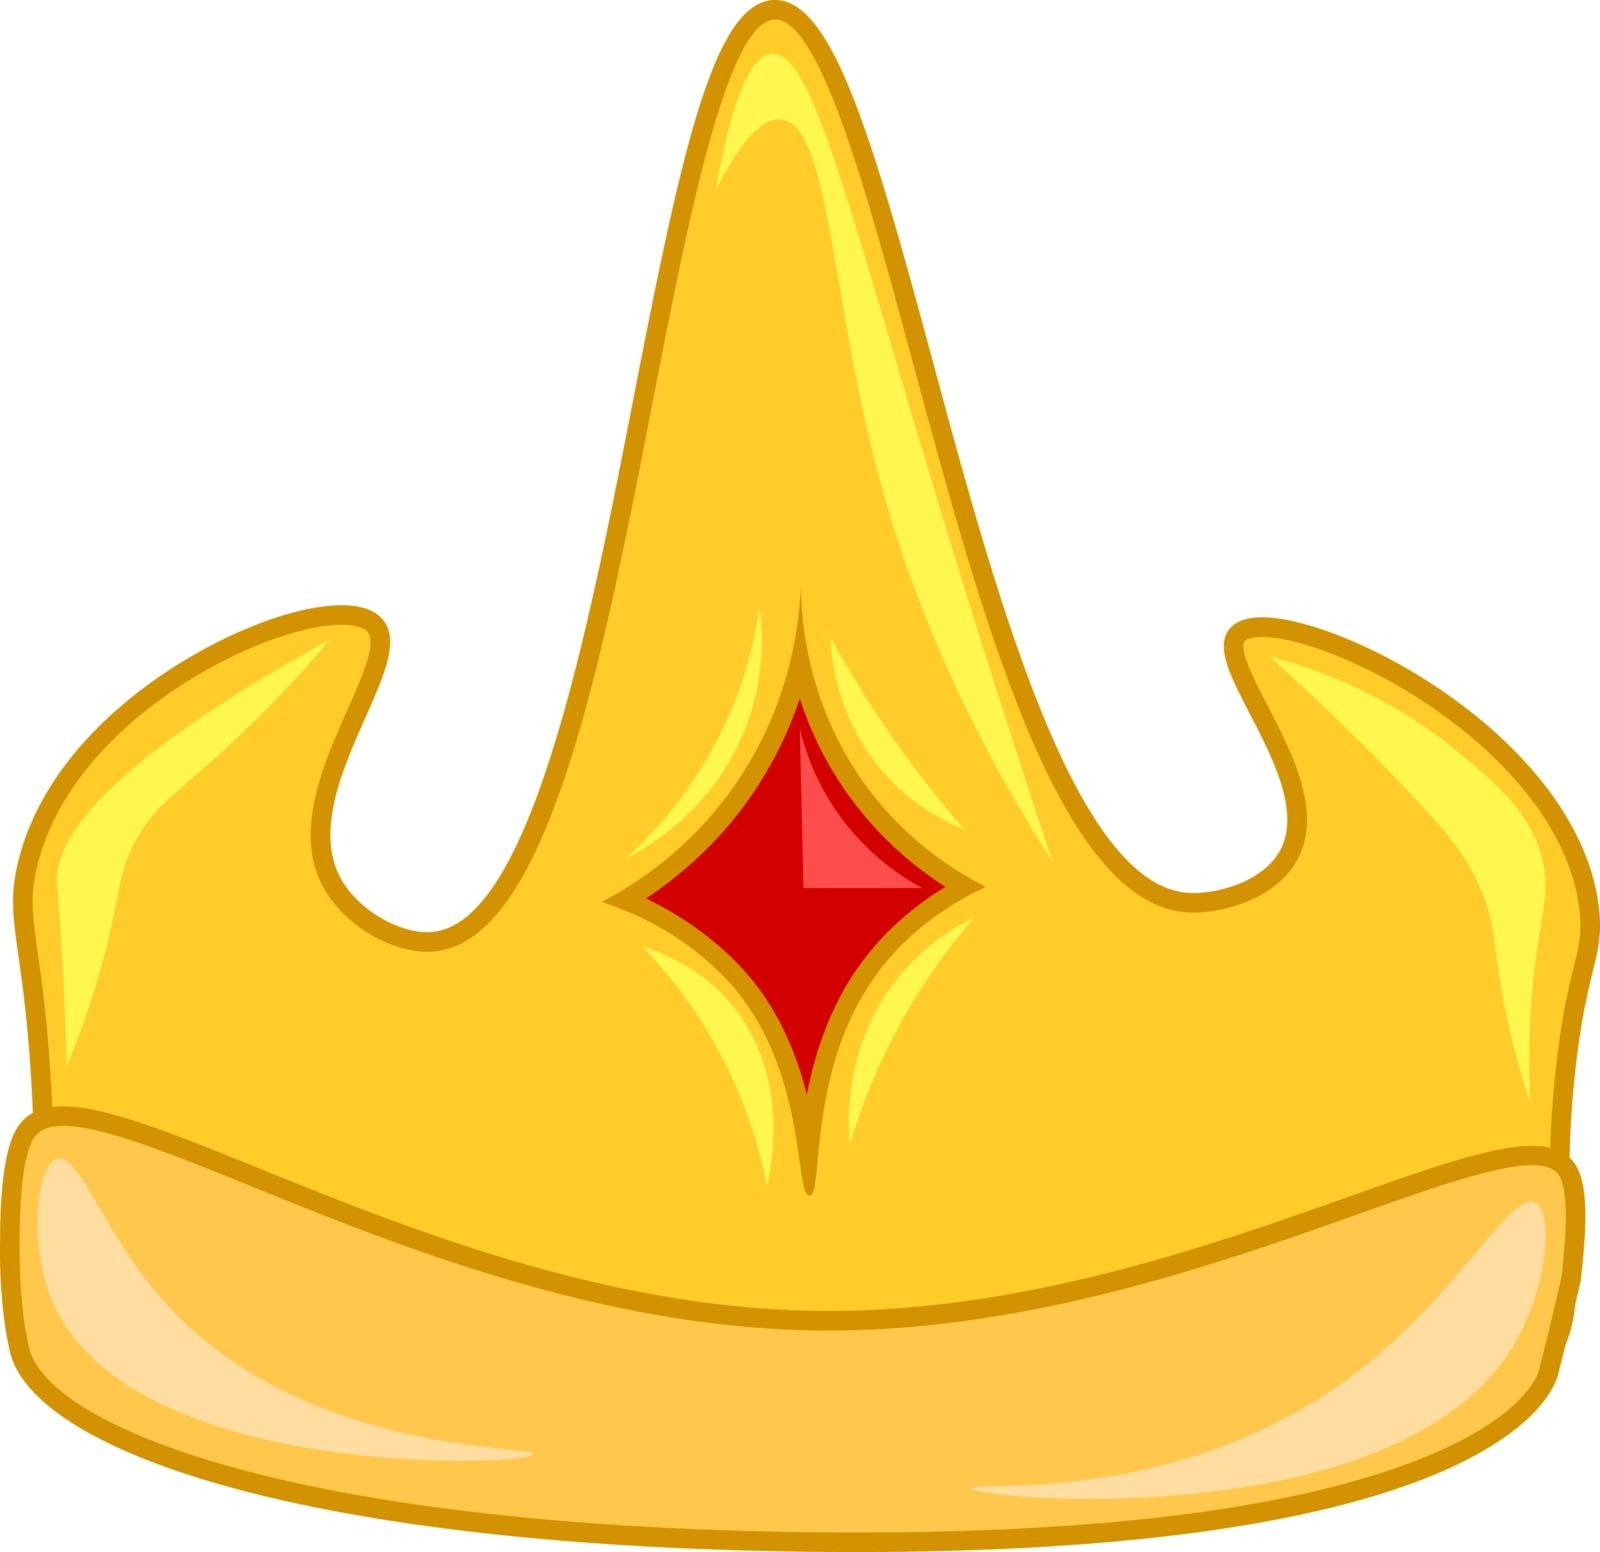 A golden crown with orange stone at the center, vector, color drawing or illustration.